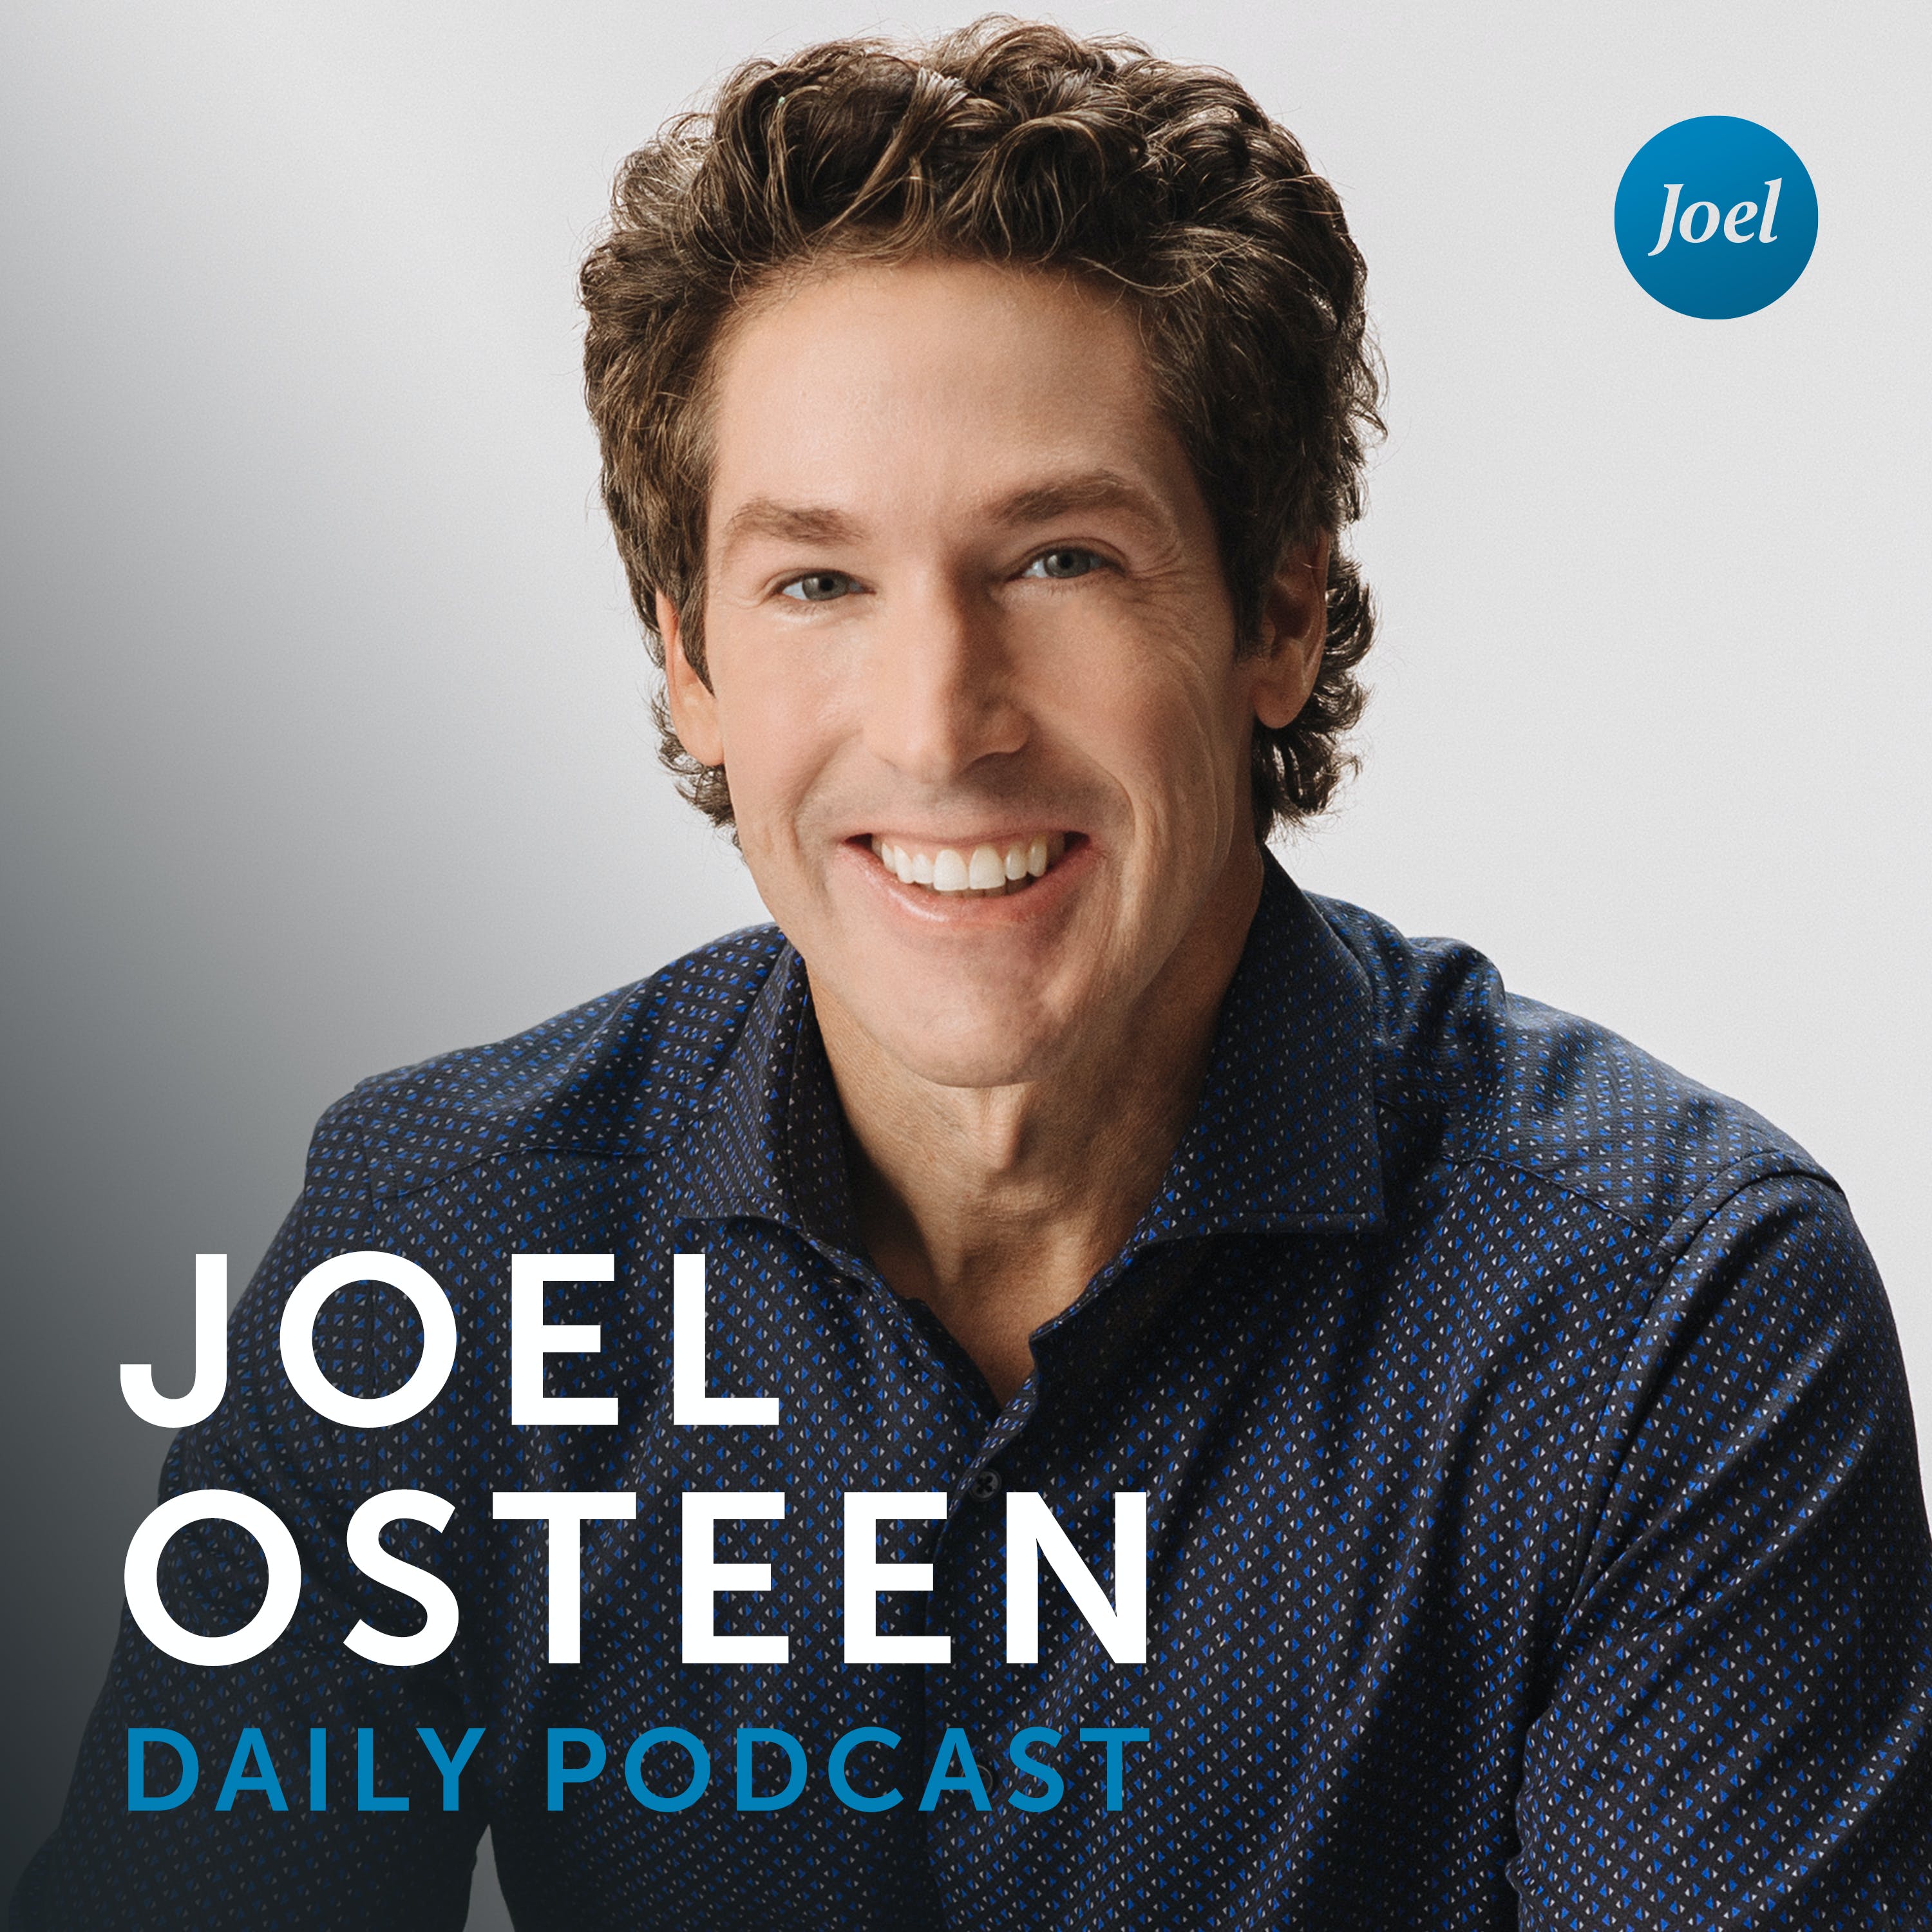 You Have What You Need | Joel Osteen